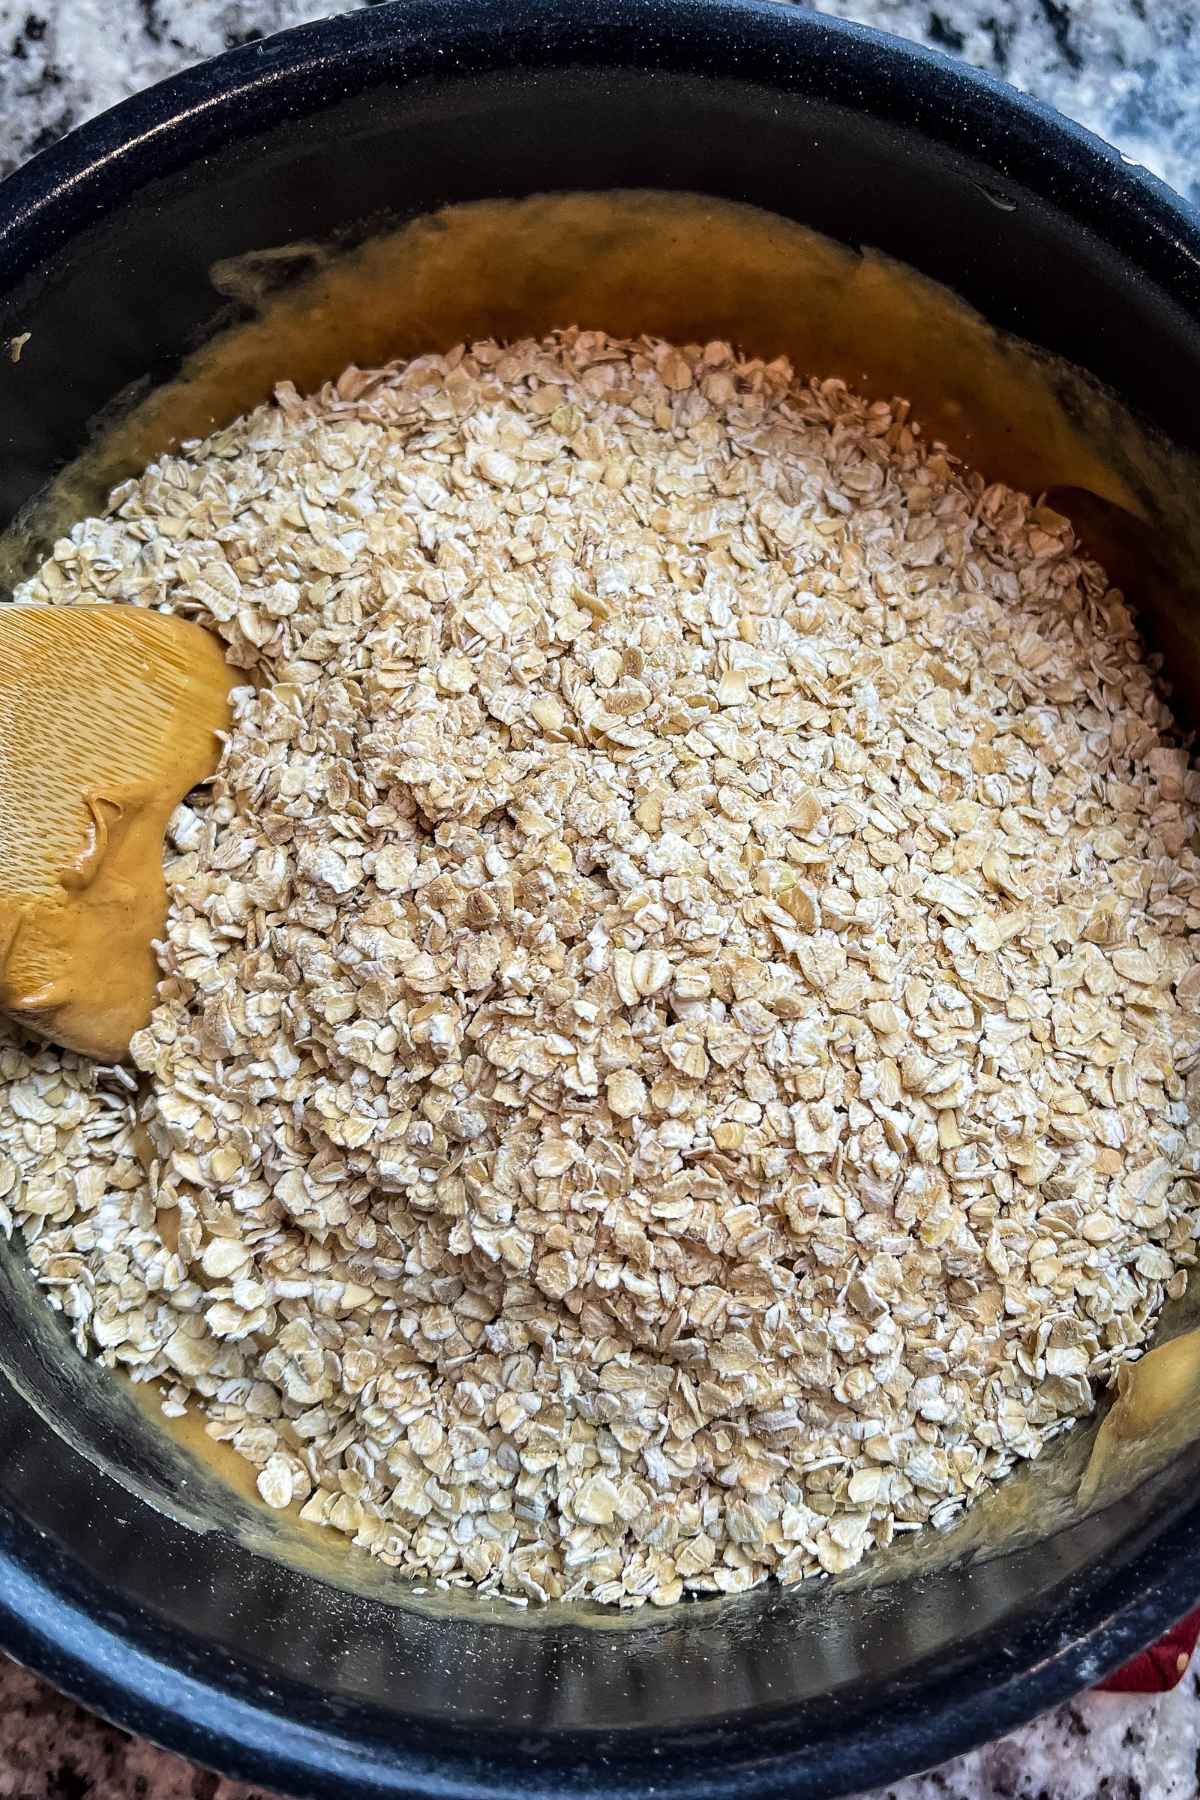 Oatmeal on top of peanut butter mixture.